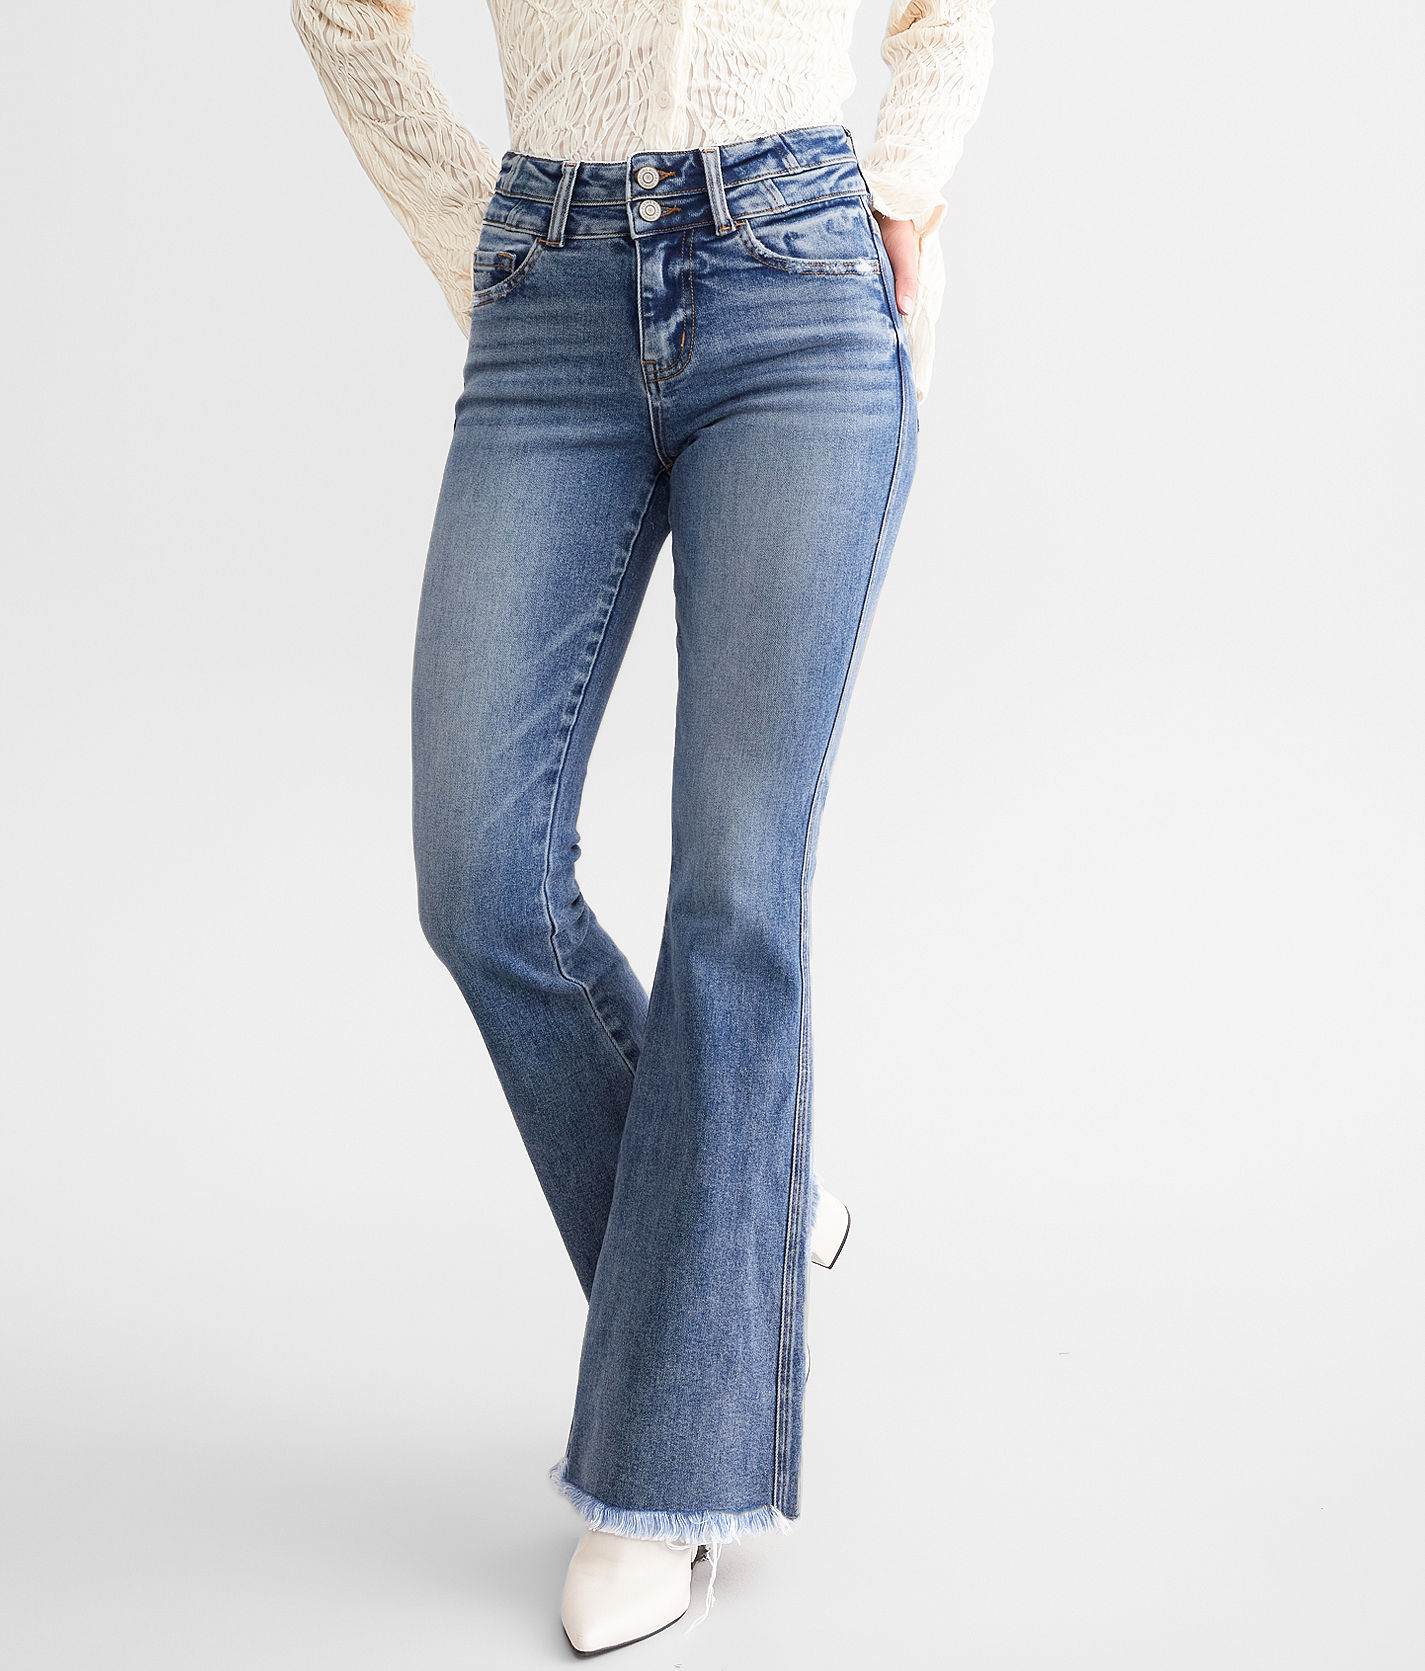 Flying Monkey Mid-Rise Flare Stretch Jean - Women's Jeans in Vail